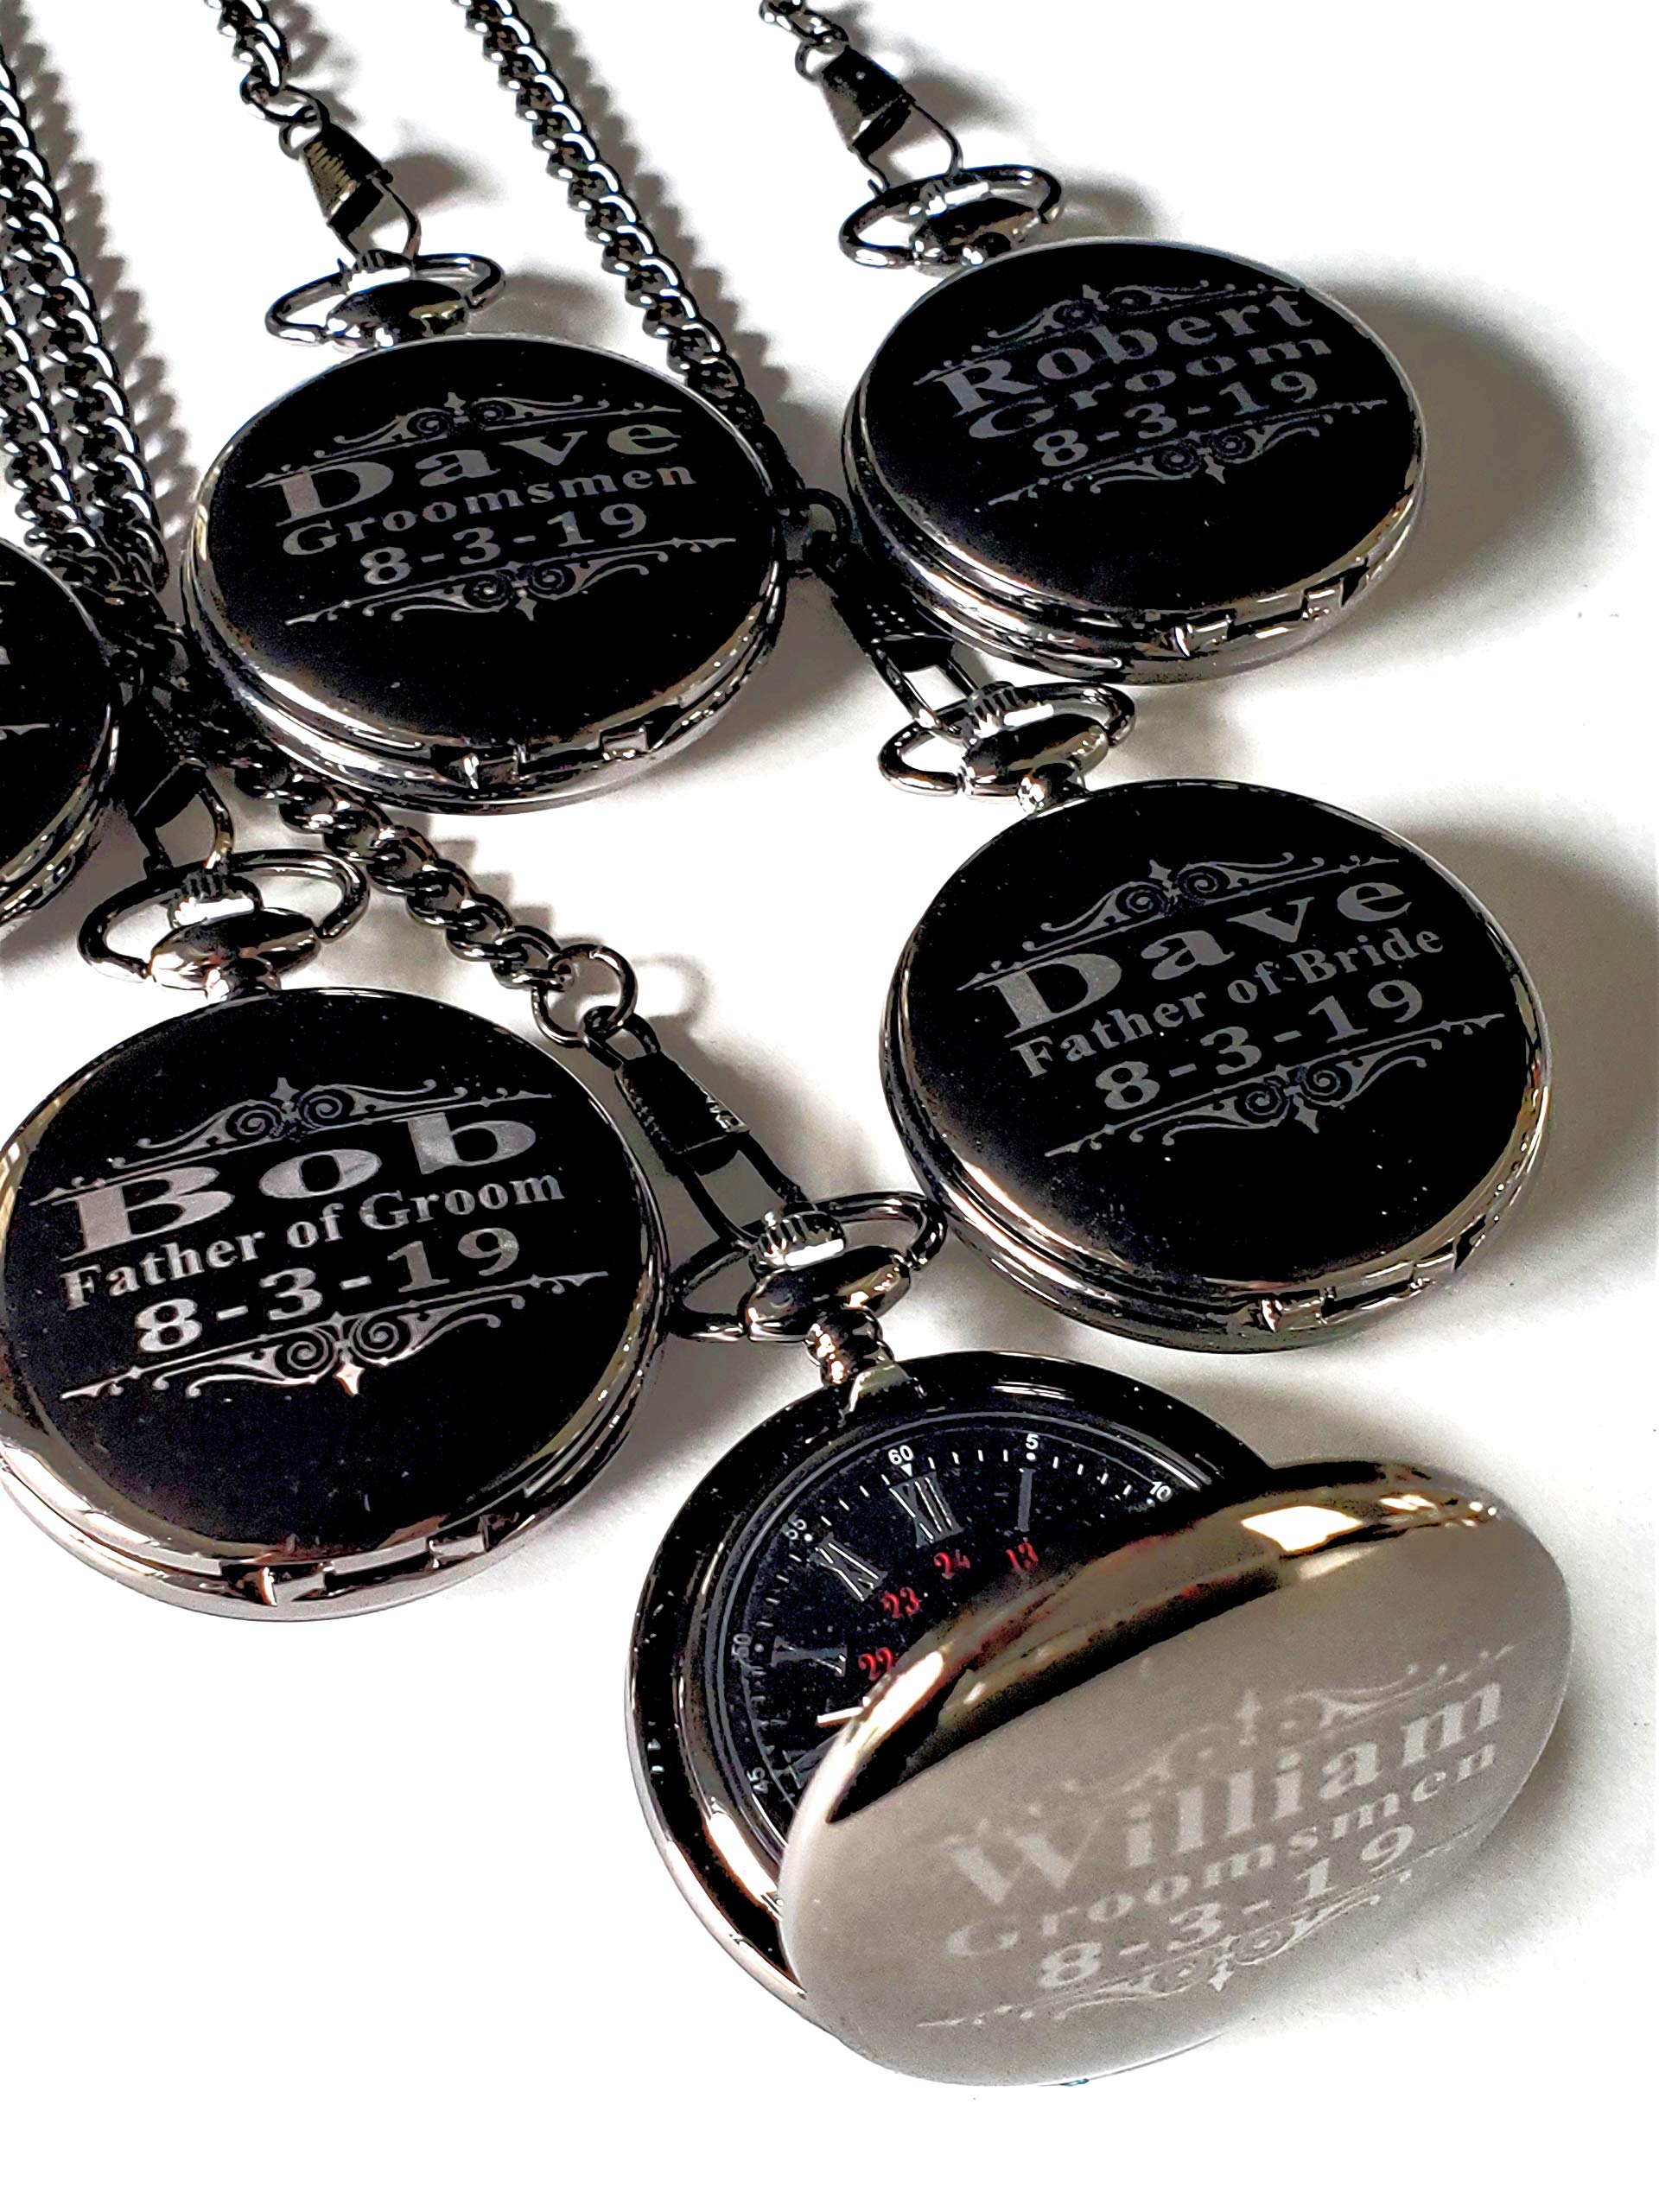 8 Custom Engraved Pocket Watches - 8 Gift Set for Weddings - Groomsmen Personalized Watches with Chain and Box Included - Engraving Included